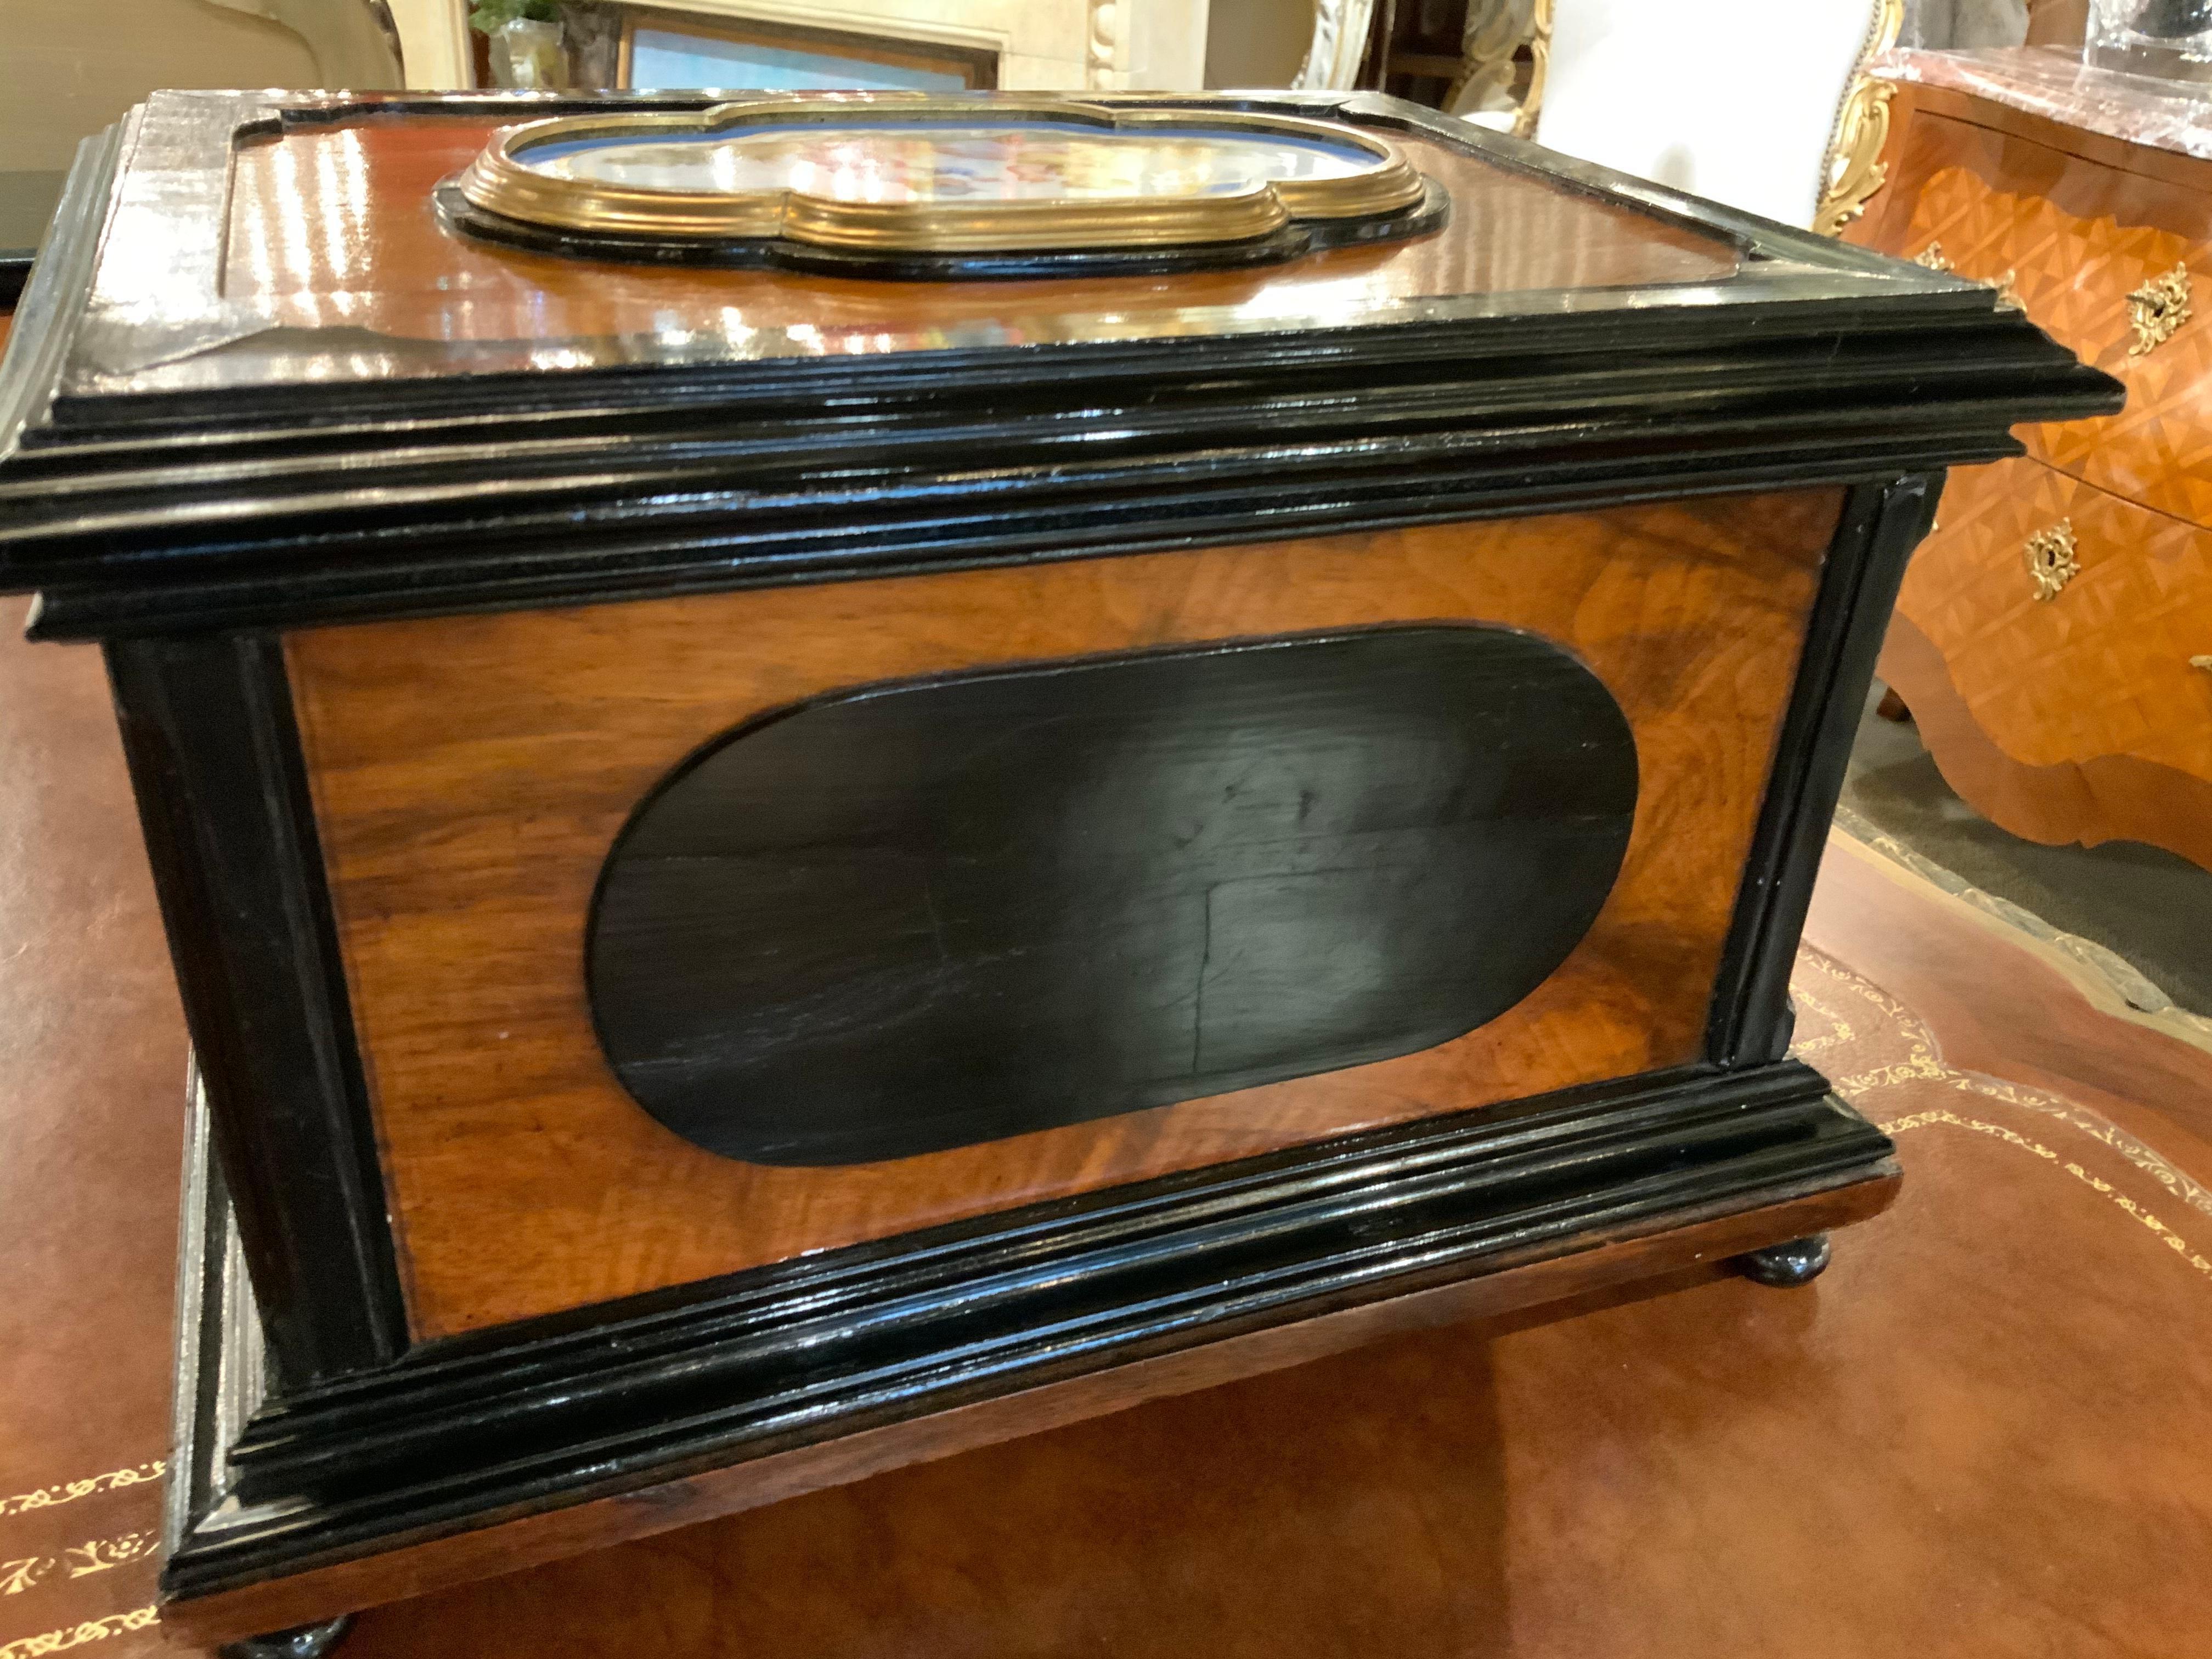 Walnut veneered case with ebonized trim and set with Sevres-style polychrome plaques decorated
With children and trophies, set into brass bezels, the interior fitted as a jewelry box.